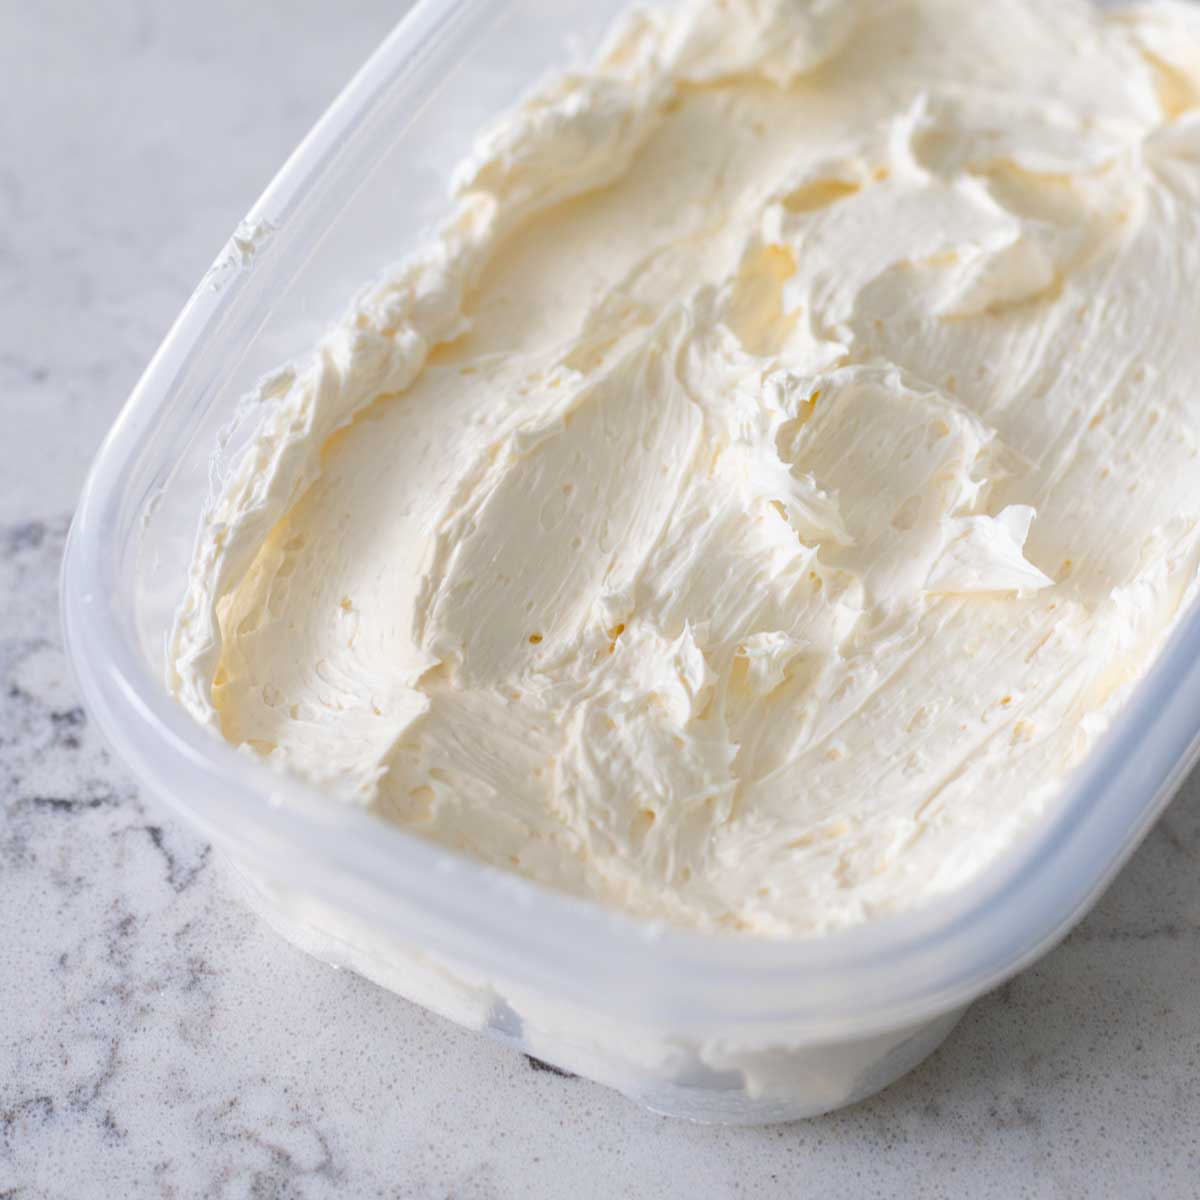 The Swiss meringue buttercream frosting has been smoothed into a freezer-safe container for storage.